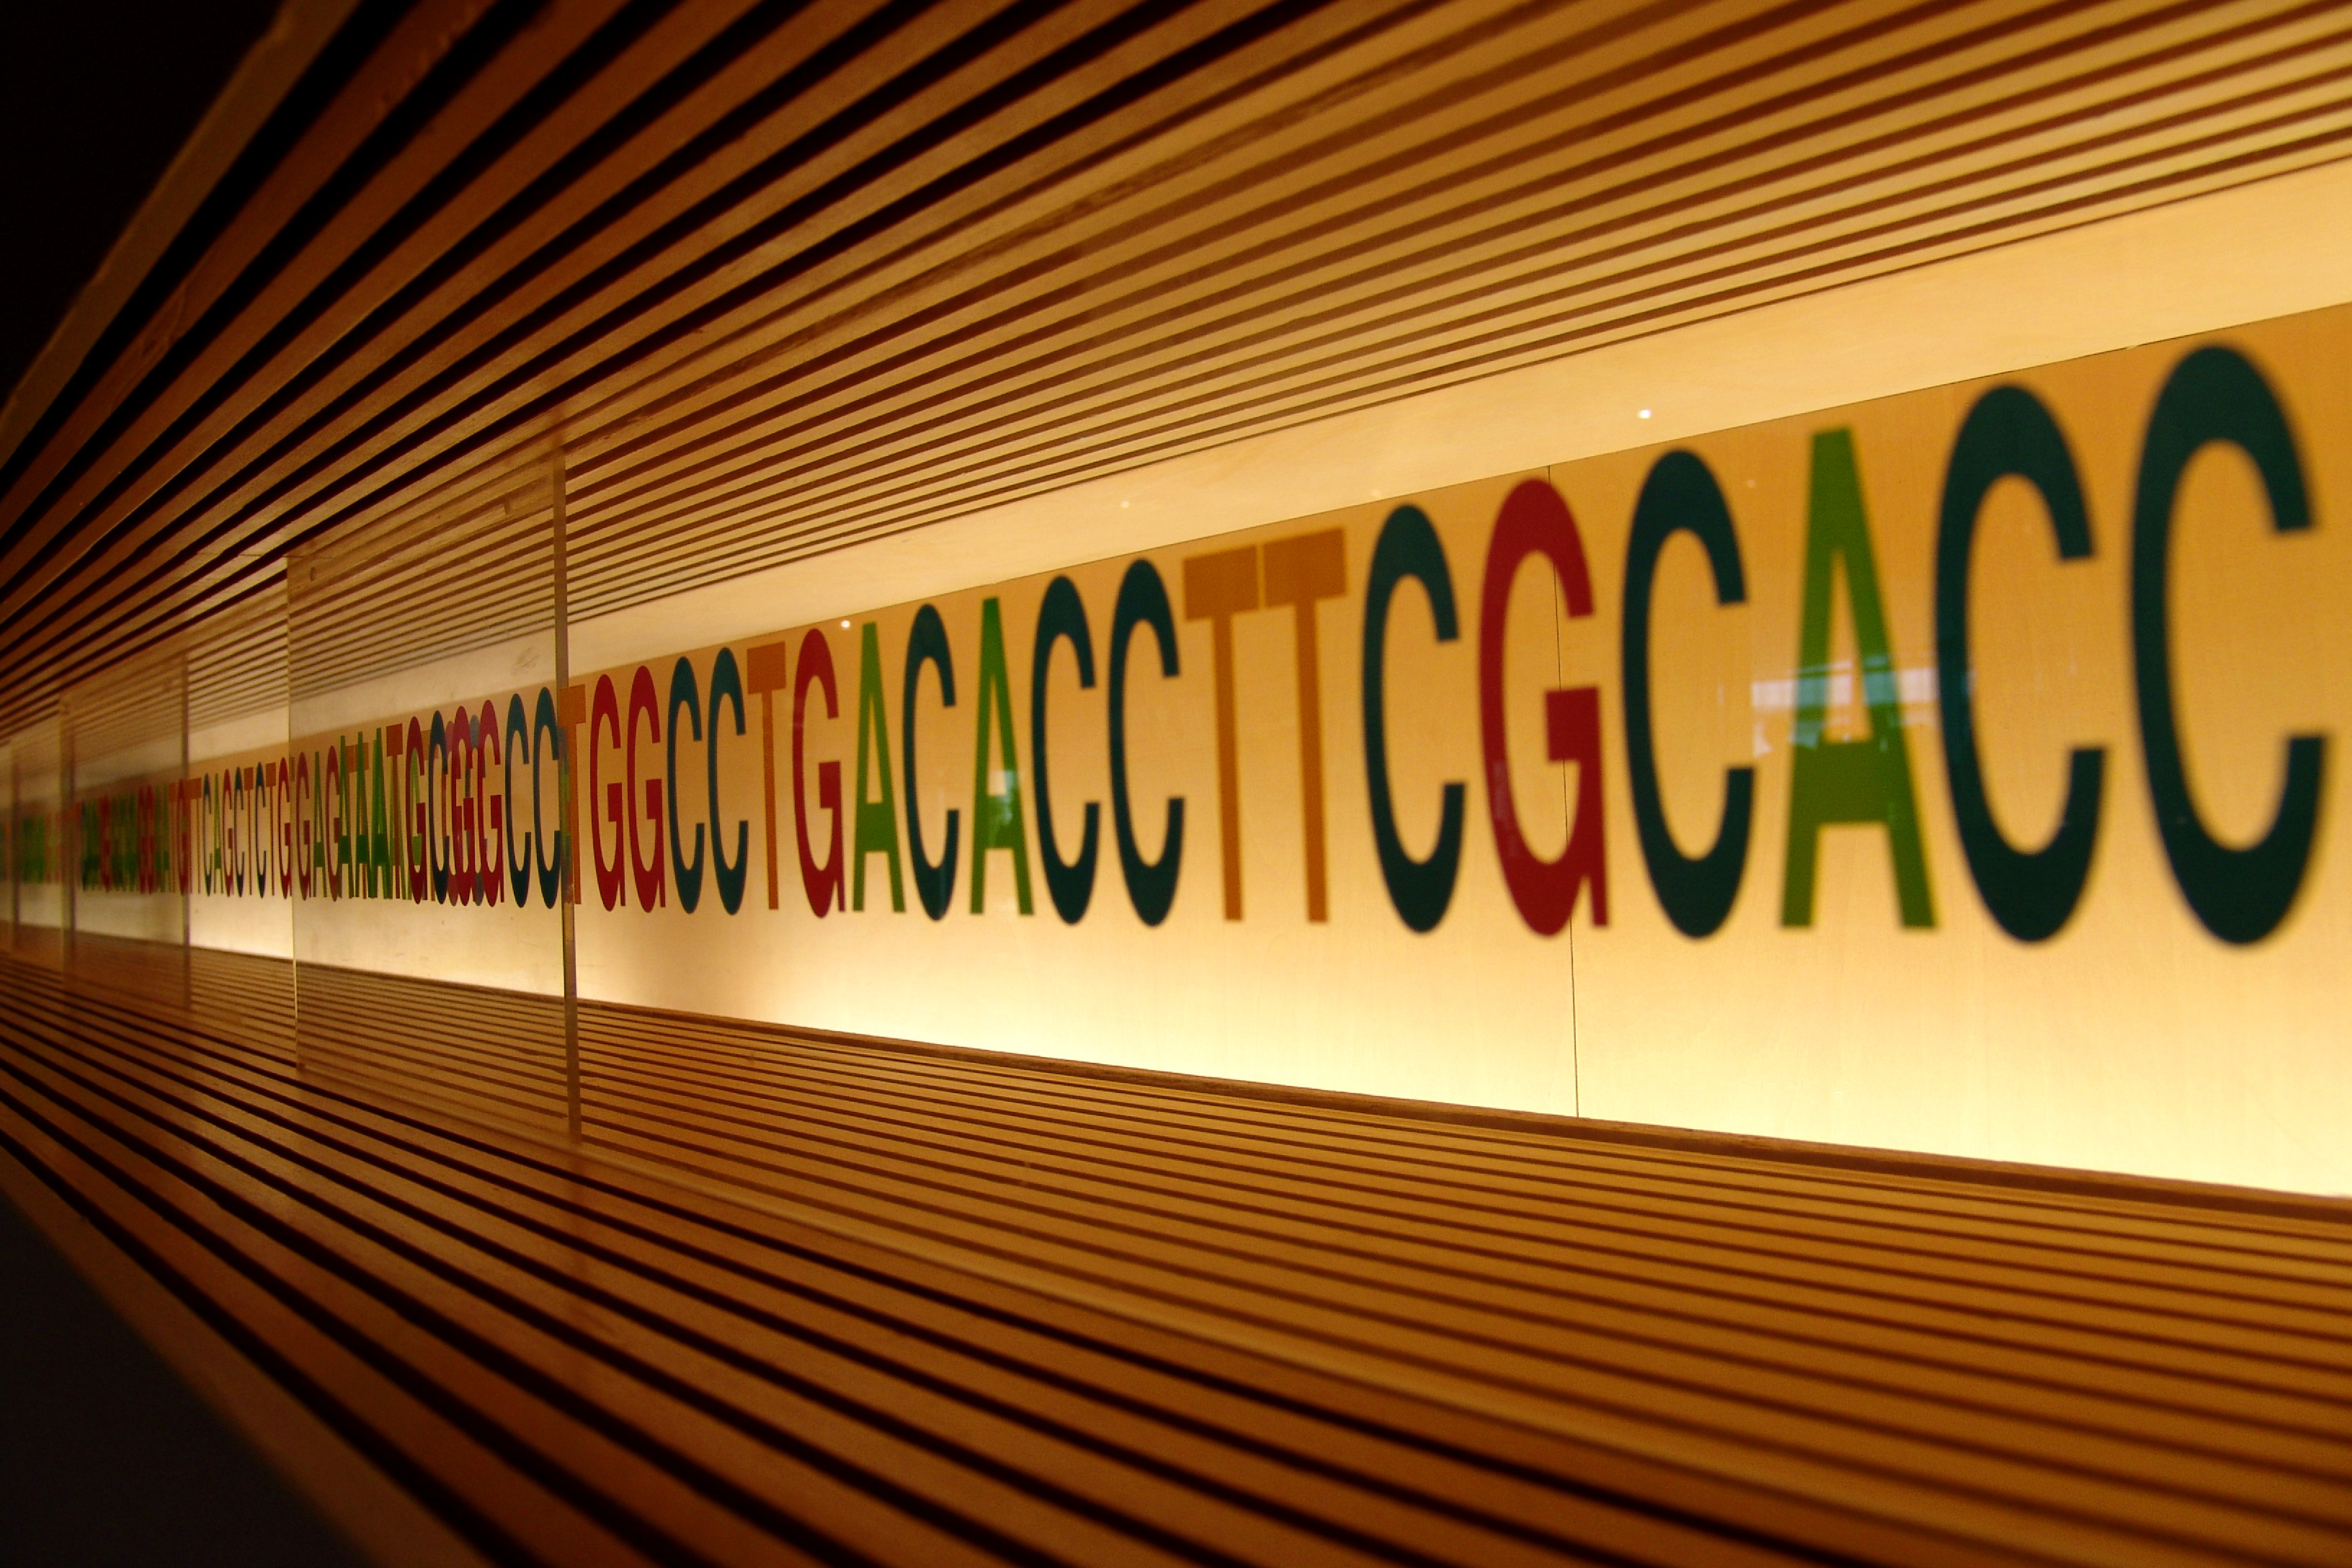 Wall display featuring large letters of ATCG in various colors. Behind, they are illuminated by a light.